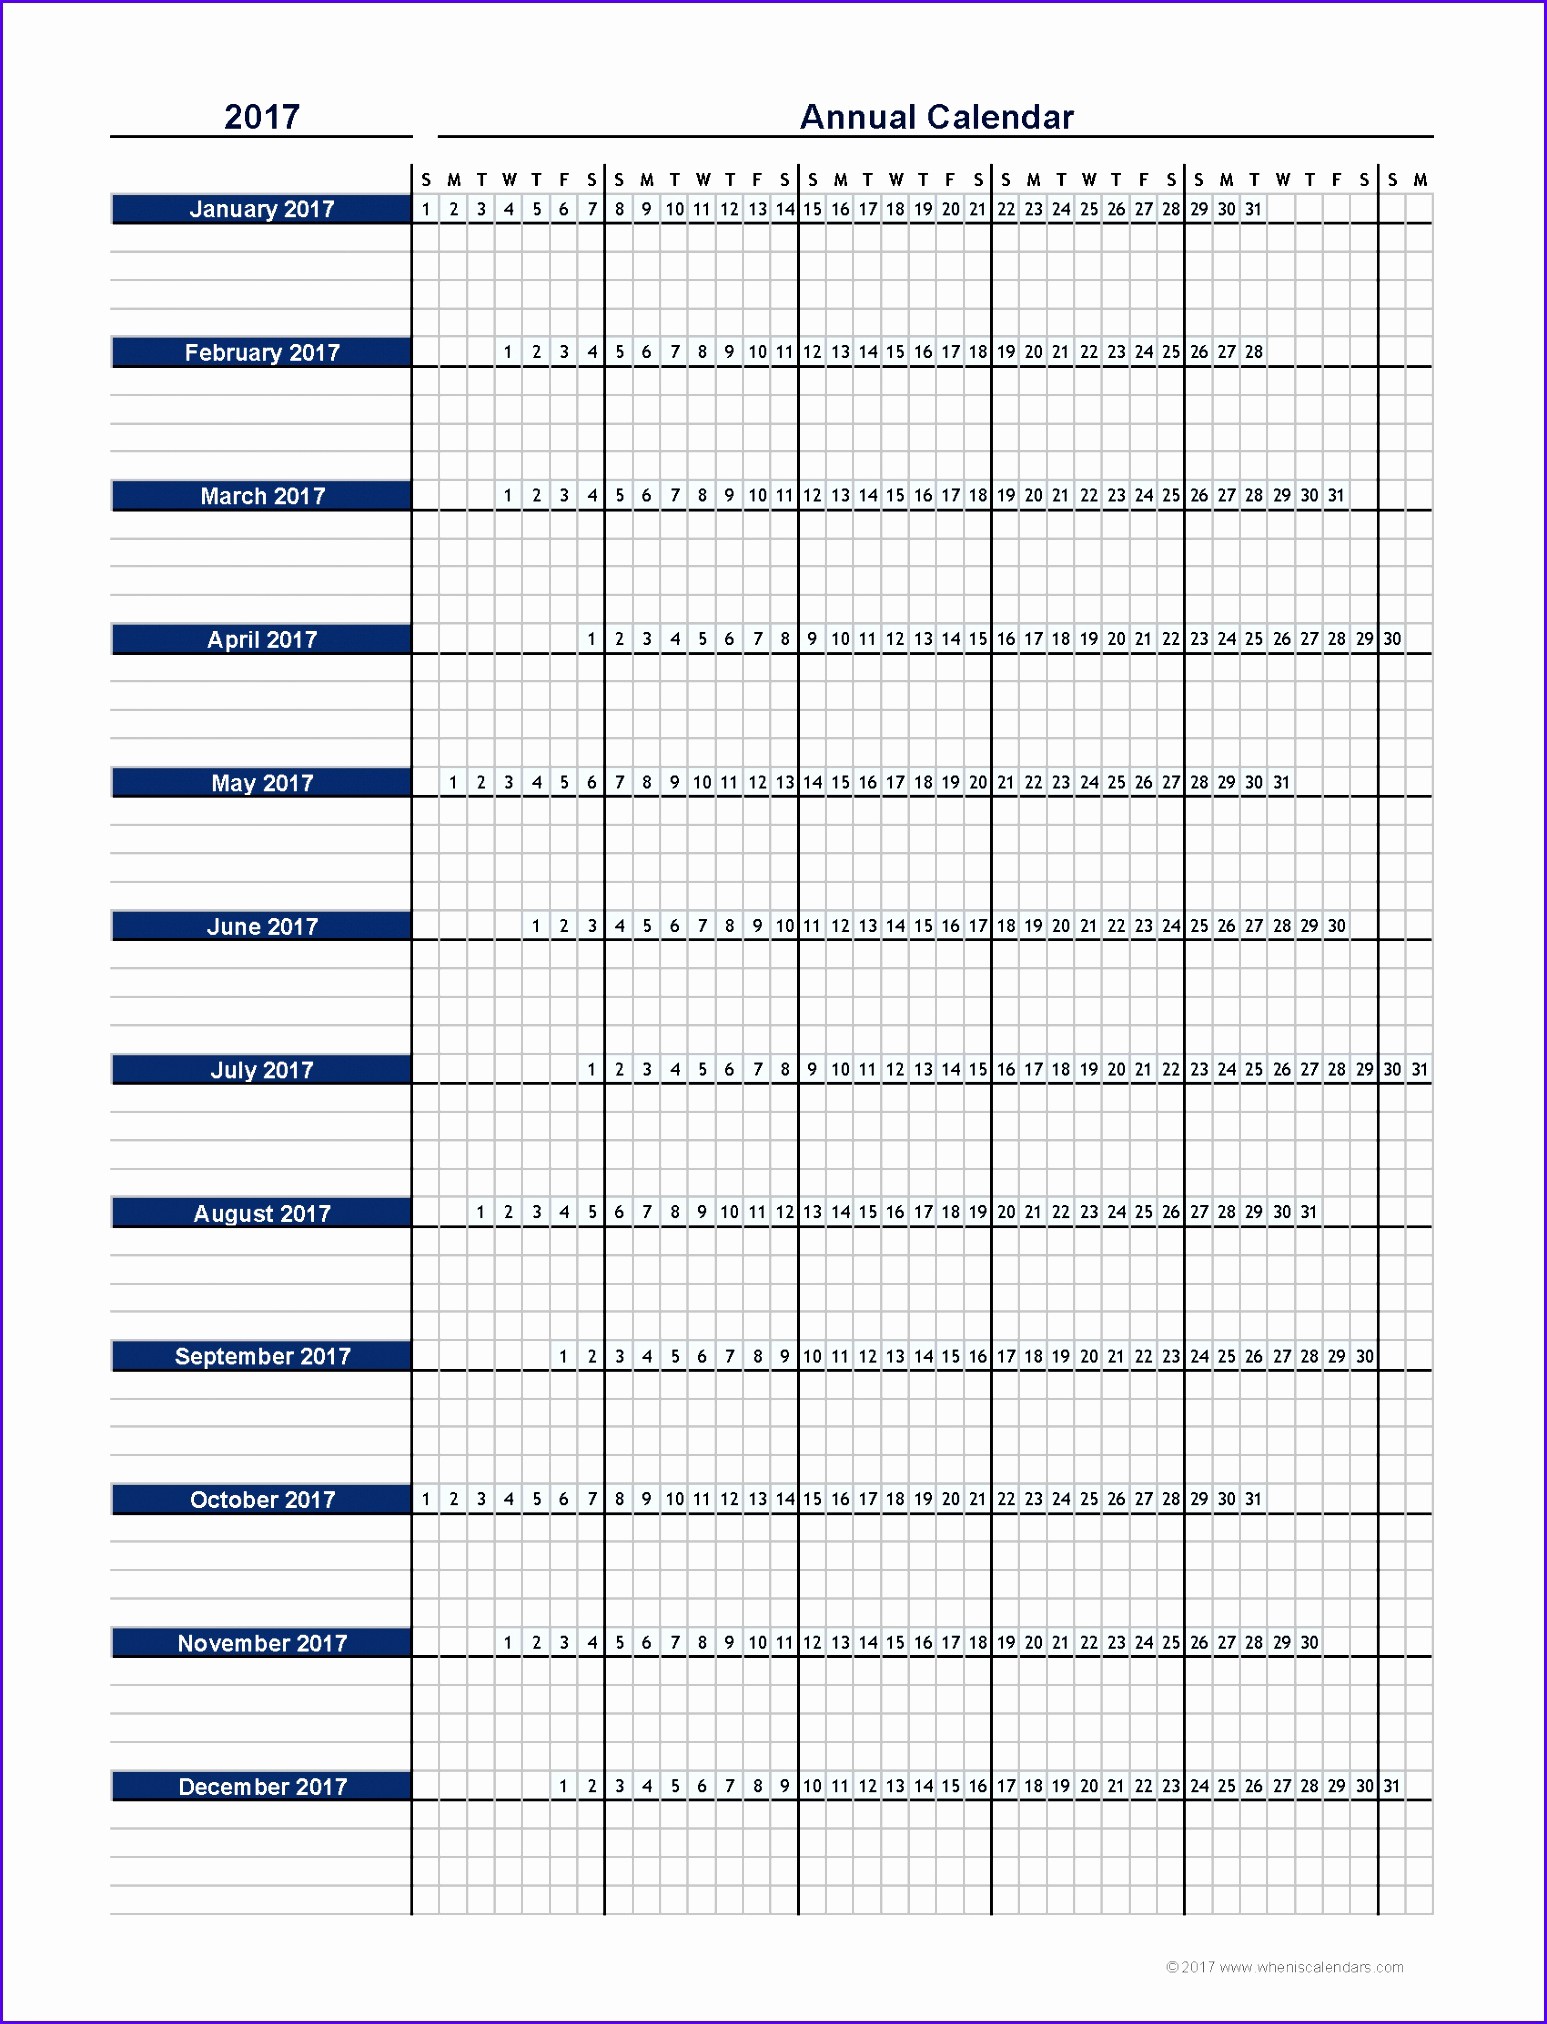 2017 Yearly Calendar Excel Template Lovely 6 Annual Calendar Template Excel Exceltemplates